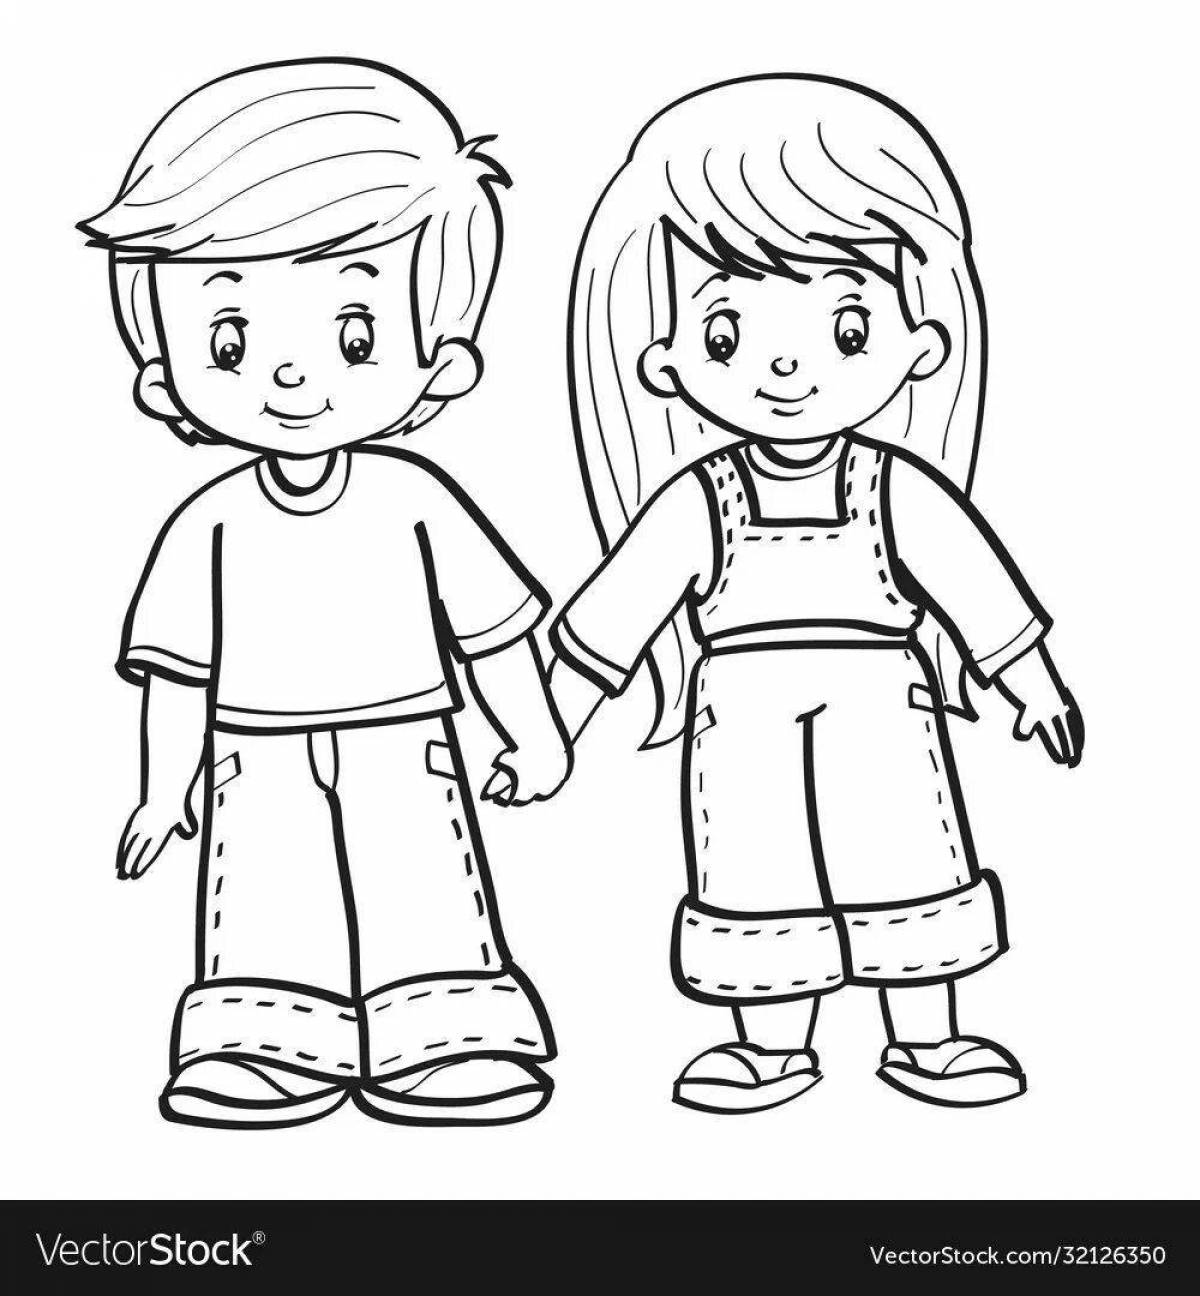 Animated coloring page of standing girl